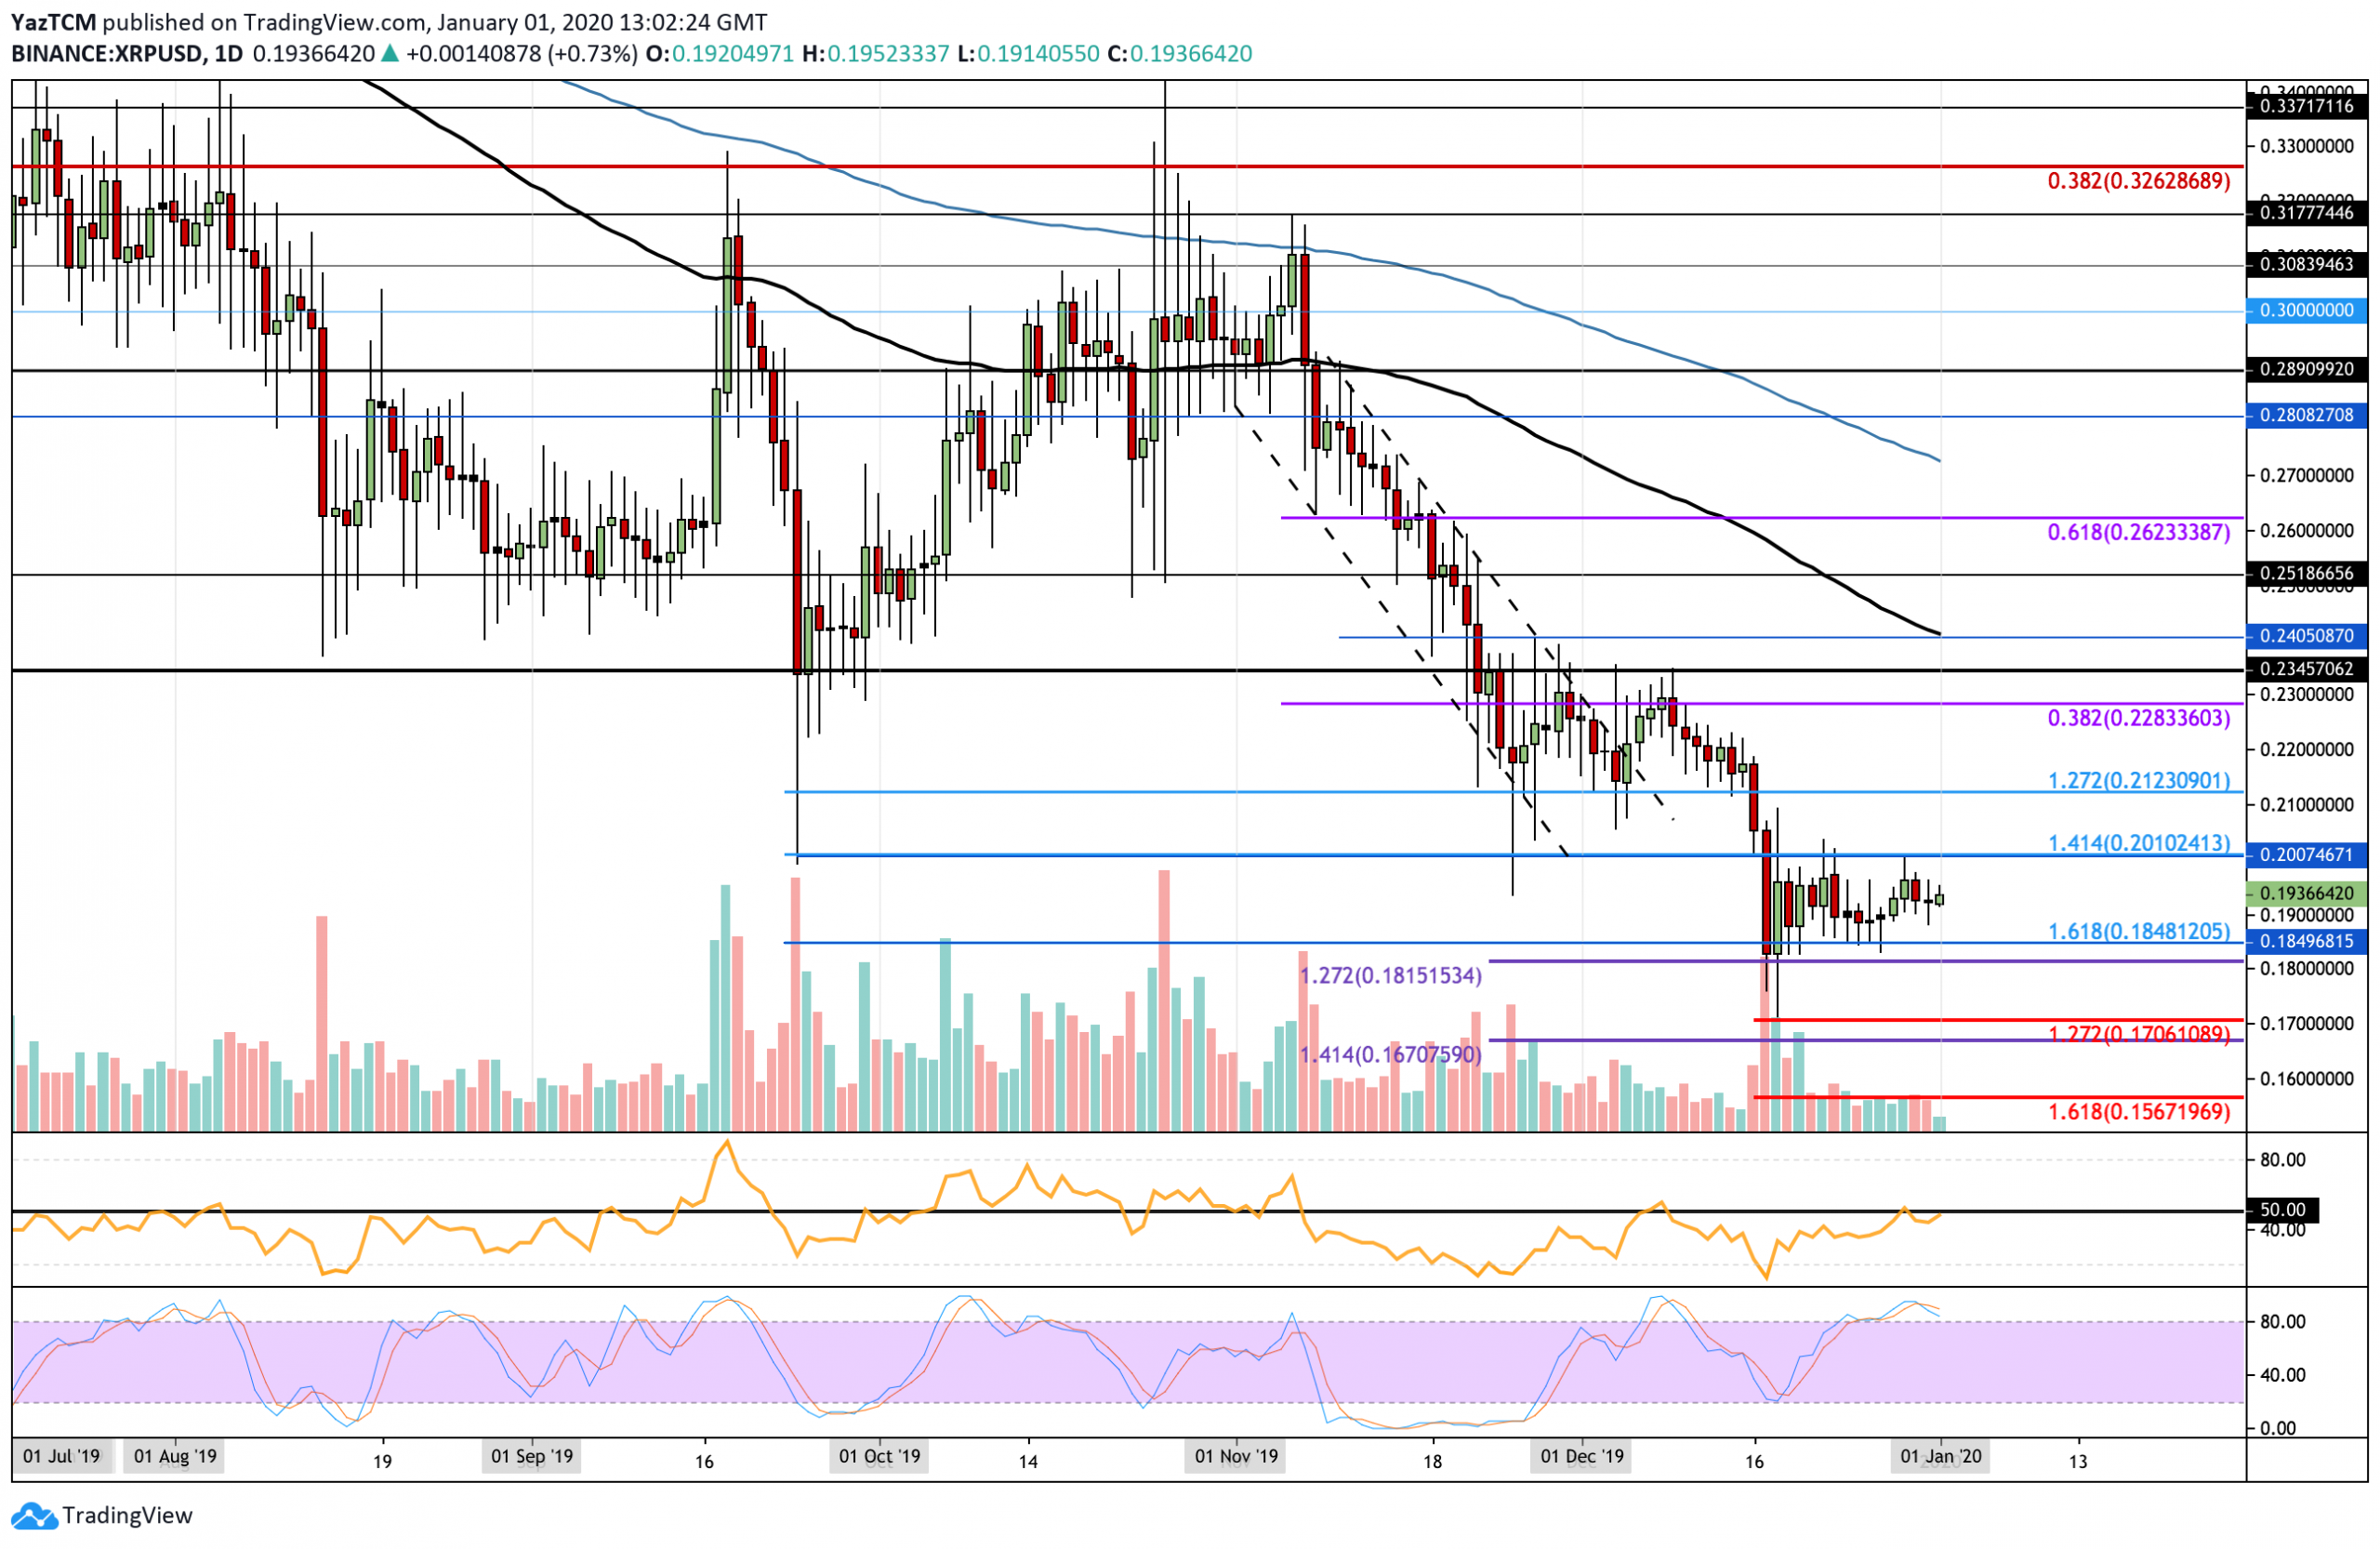 Ripple Price Analysis: New Decade, Old Resistance – XRP To Overcome $0.20 In January?